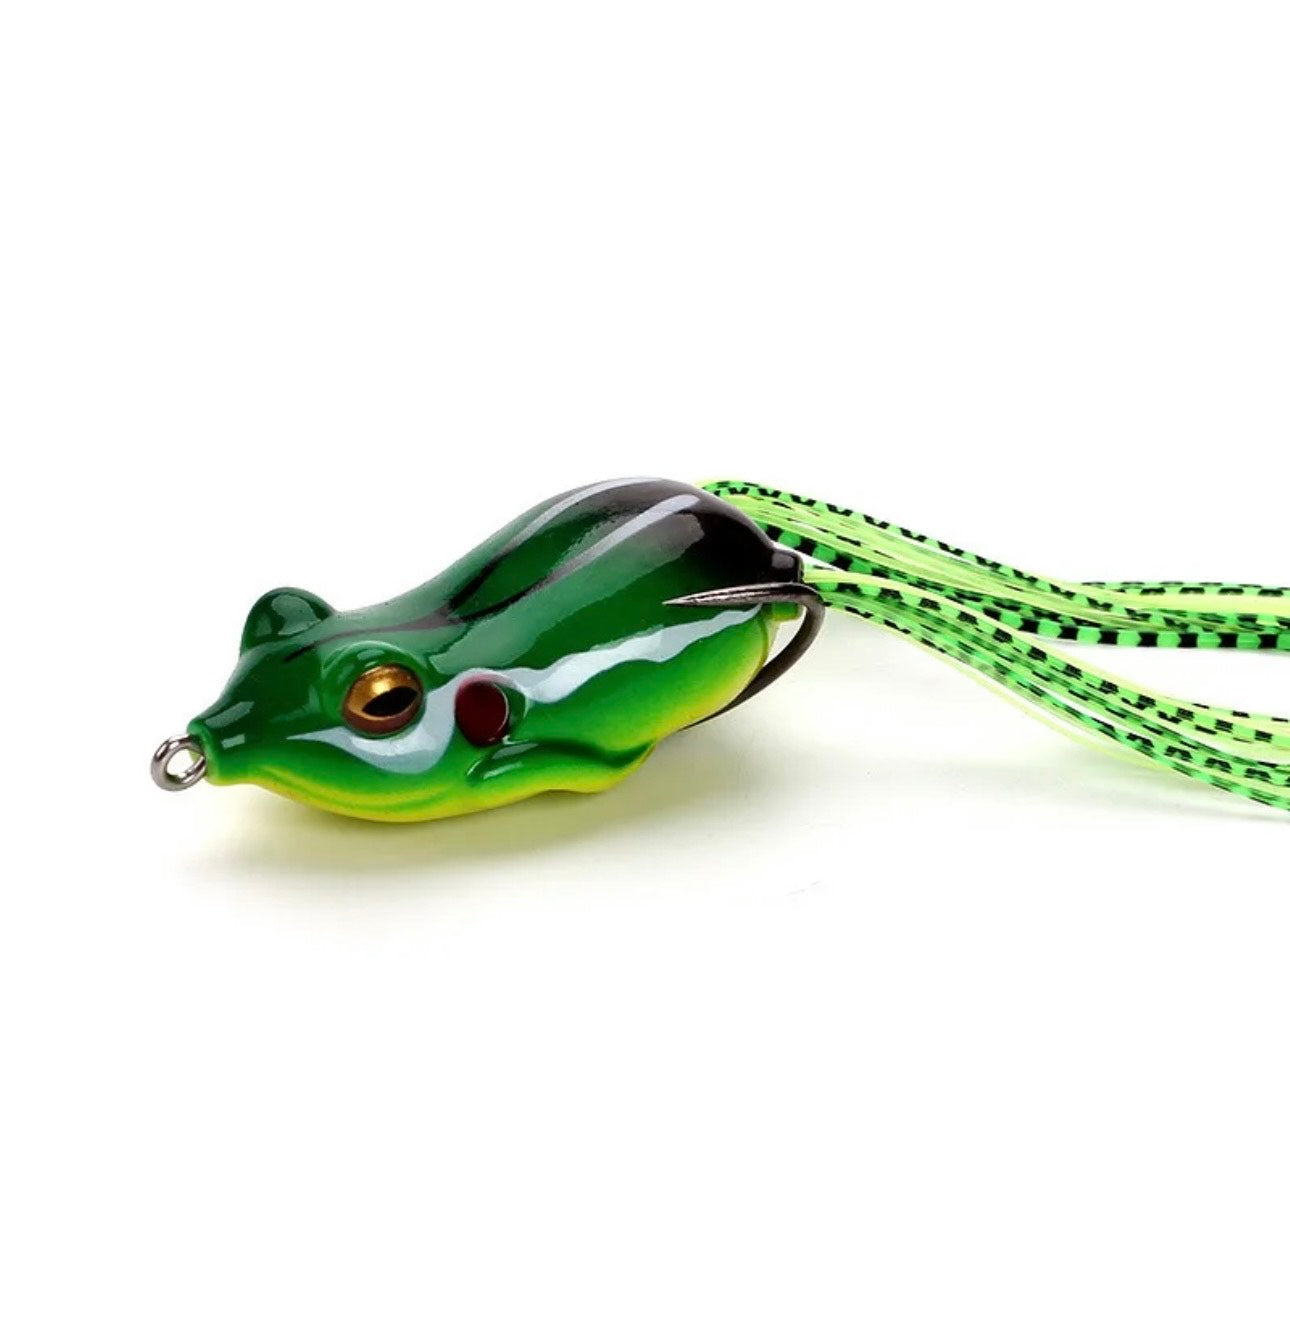 topwater frog, topwater frog Suppliers and Manufacturers at